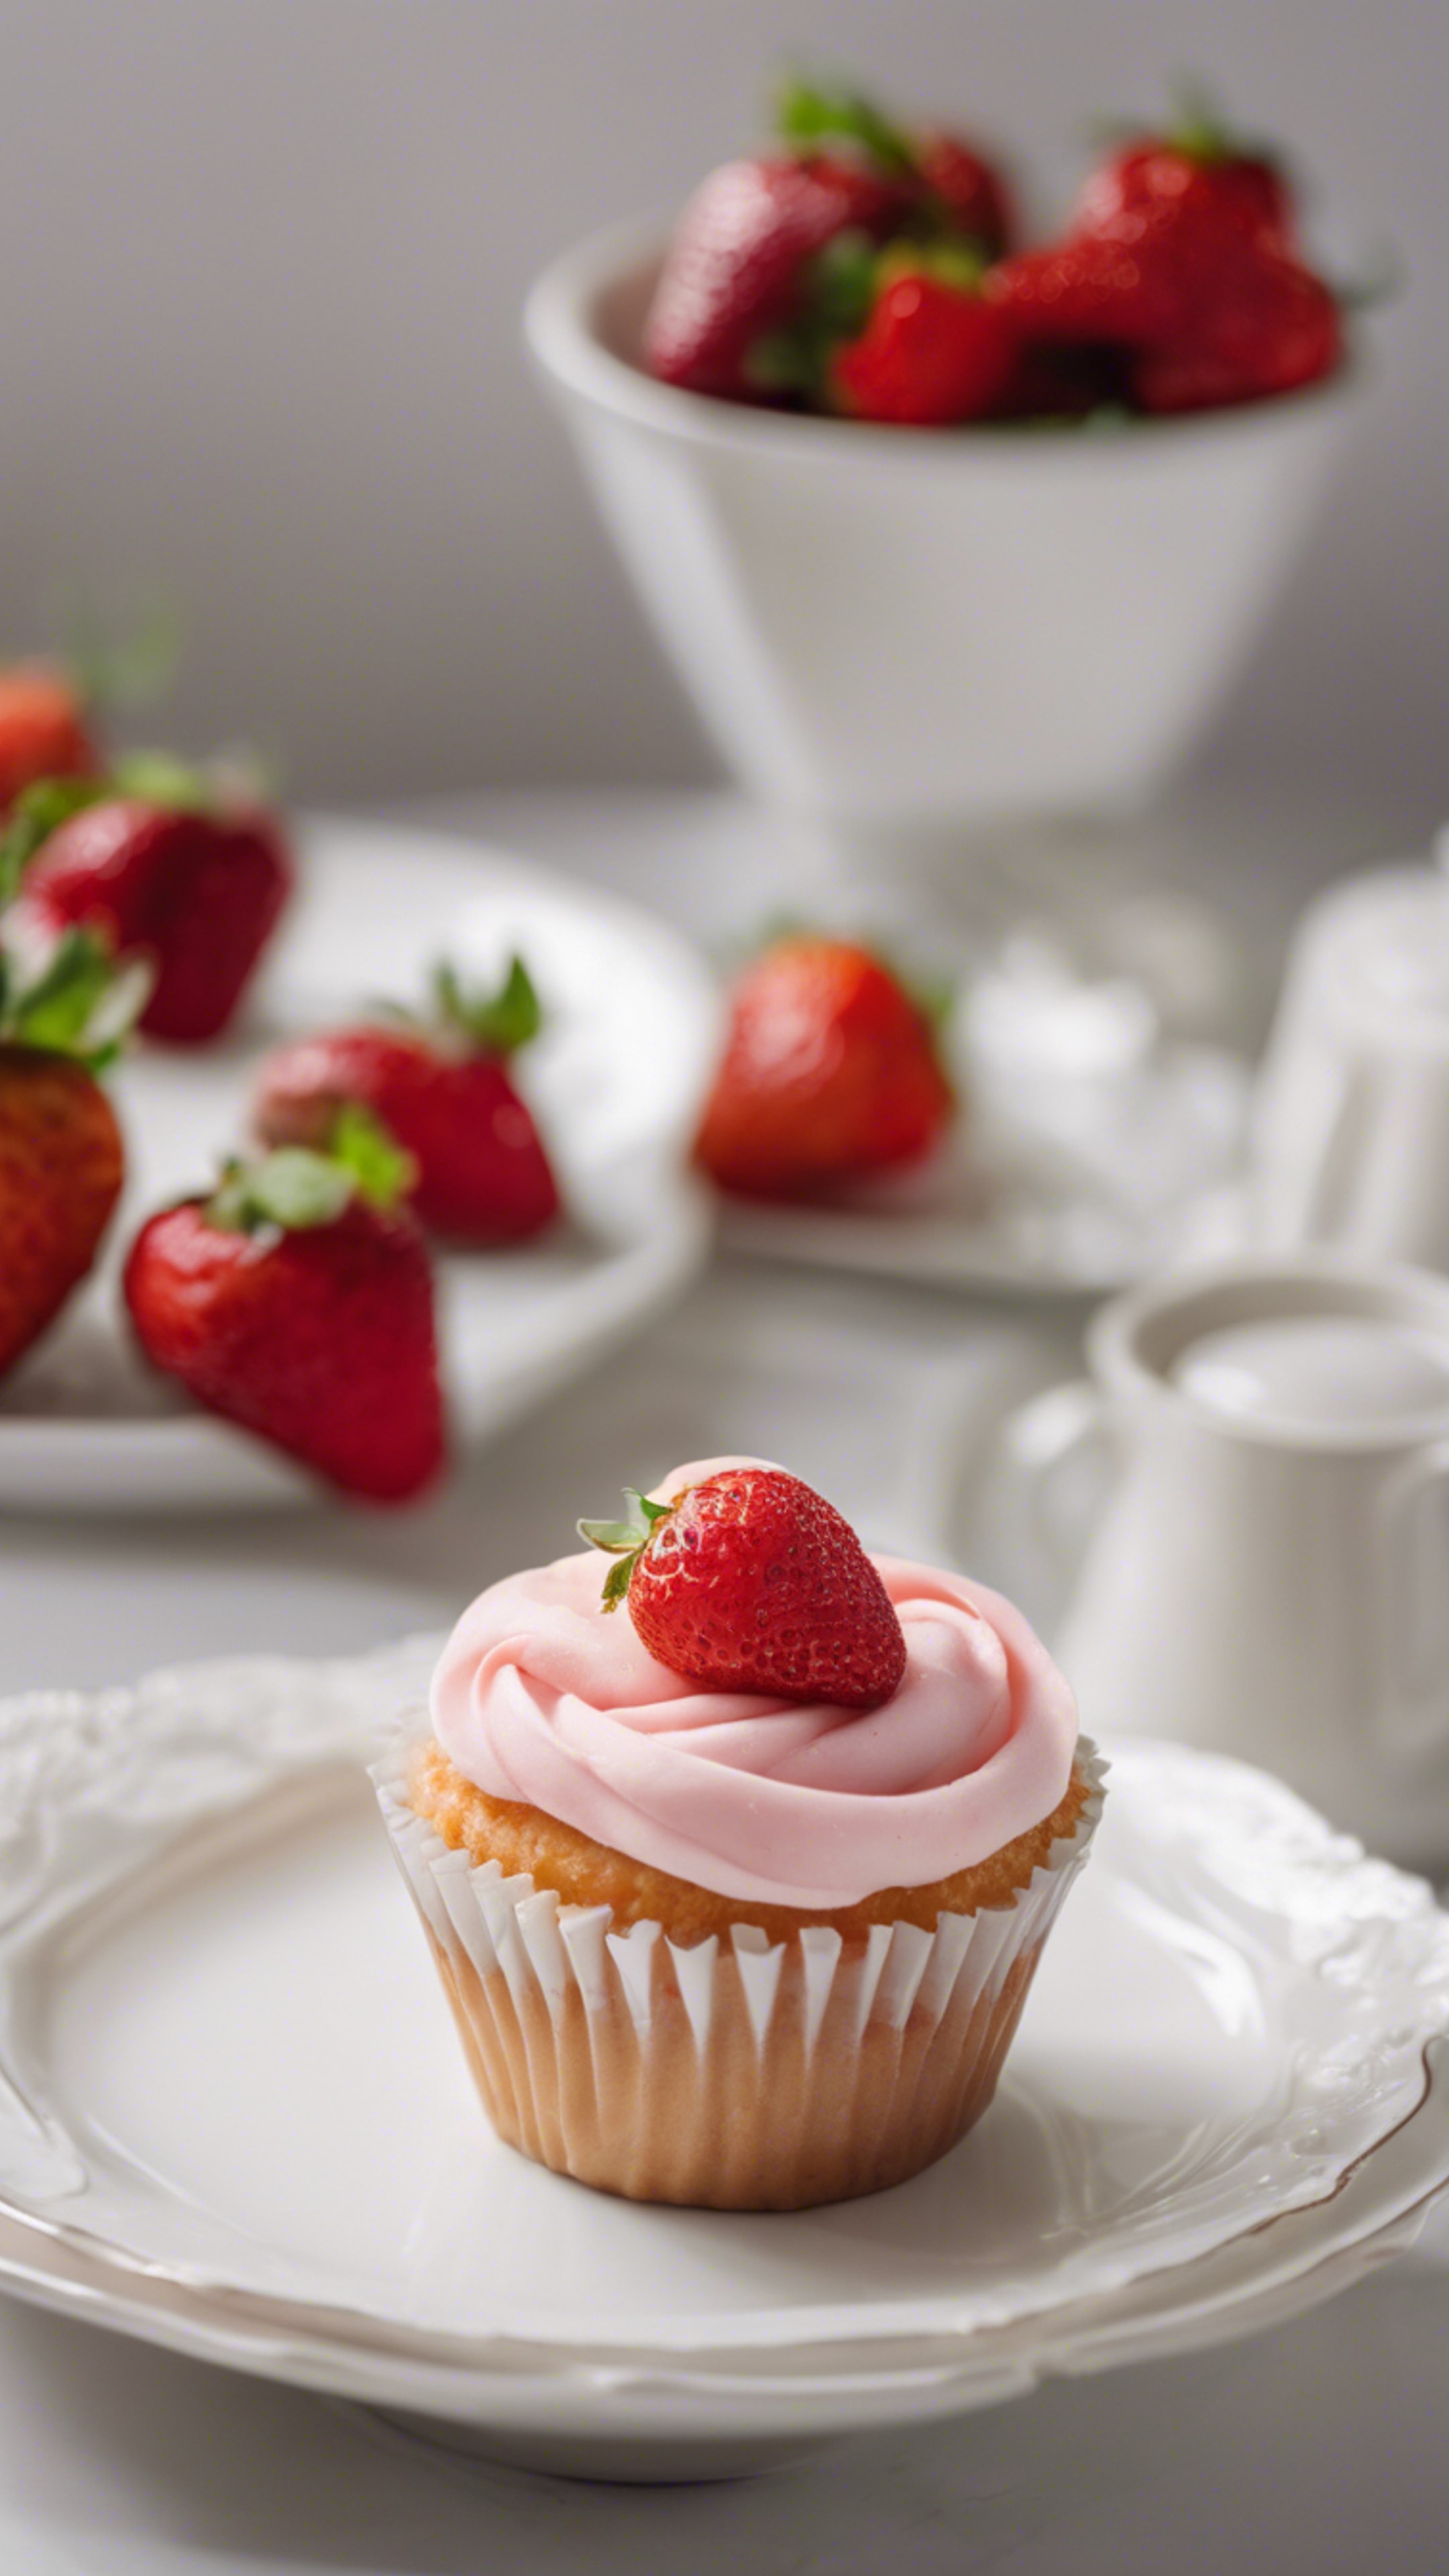 A single strawberry cupcake on a white porcelain plate in bright daylight. 墙纸[ddcb3576222e4604b5c8]